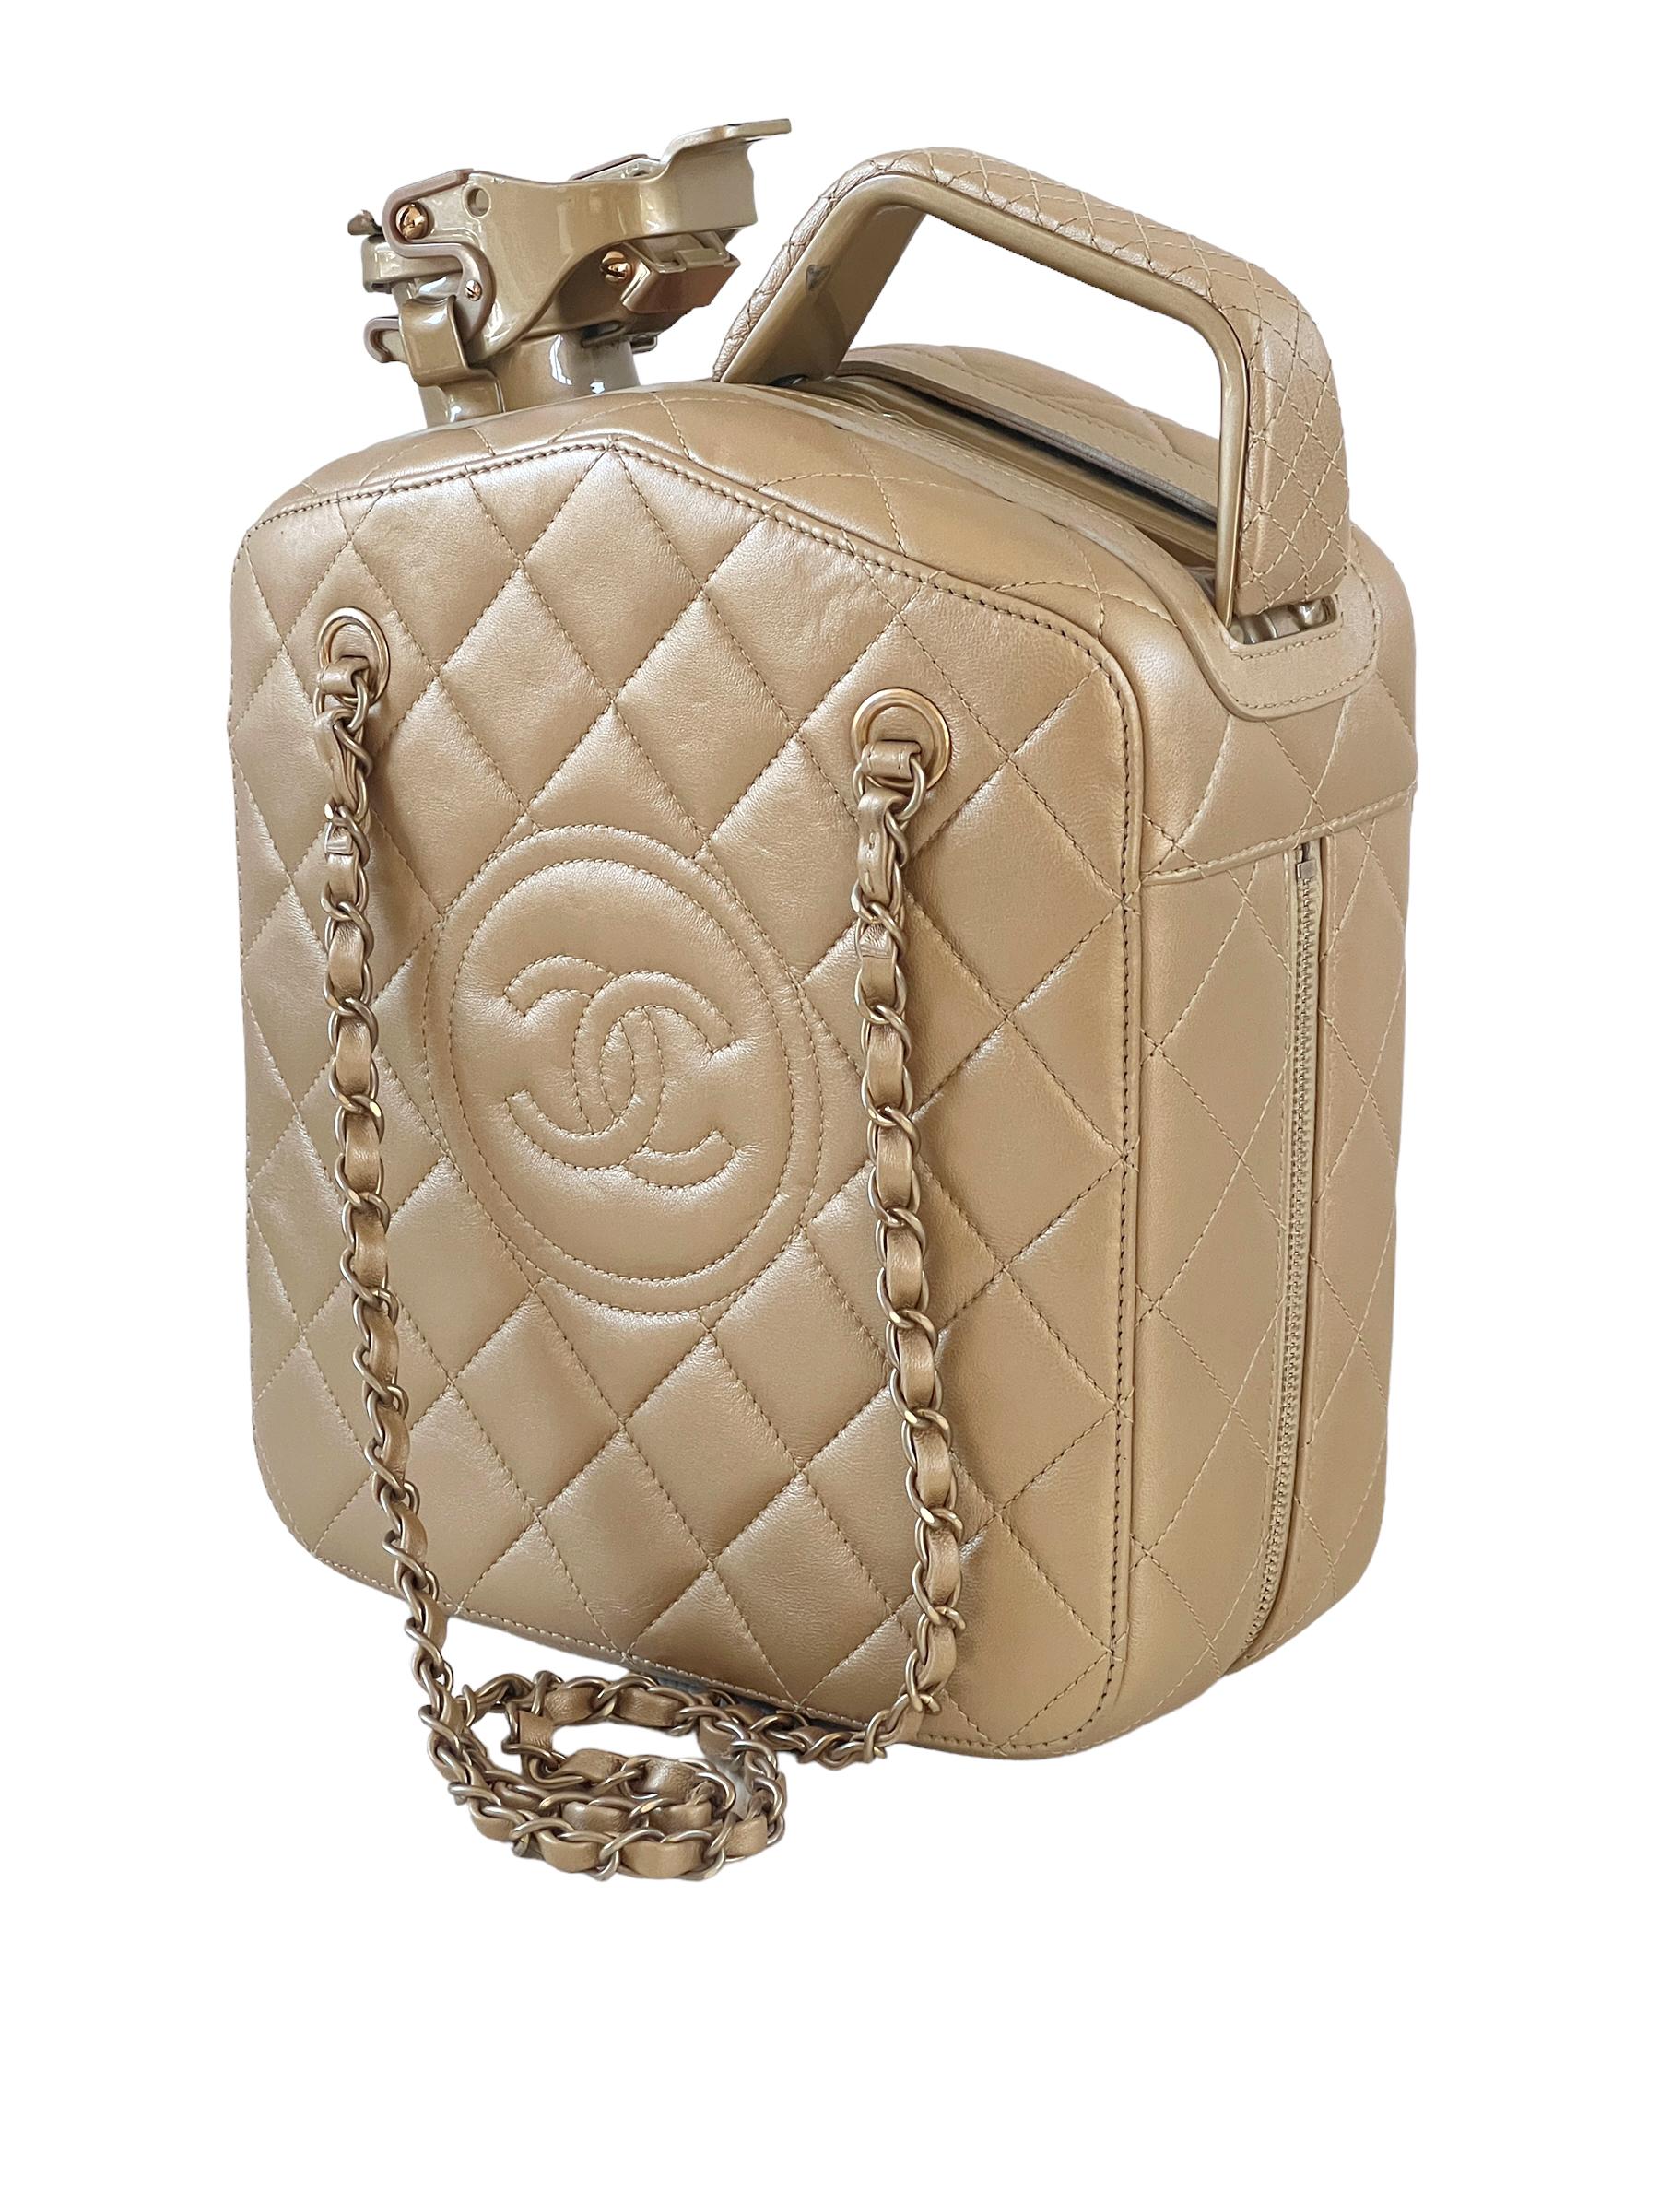 Chanel 2015 Paris Dubai Jerry Tank Gas Can Accessory Bag  In Excellent Condition For Sale In Los Angeles, CA